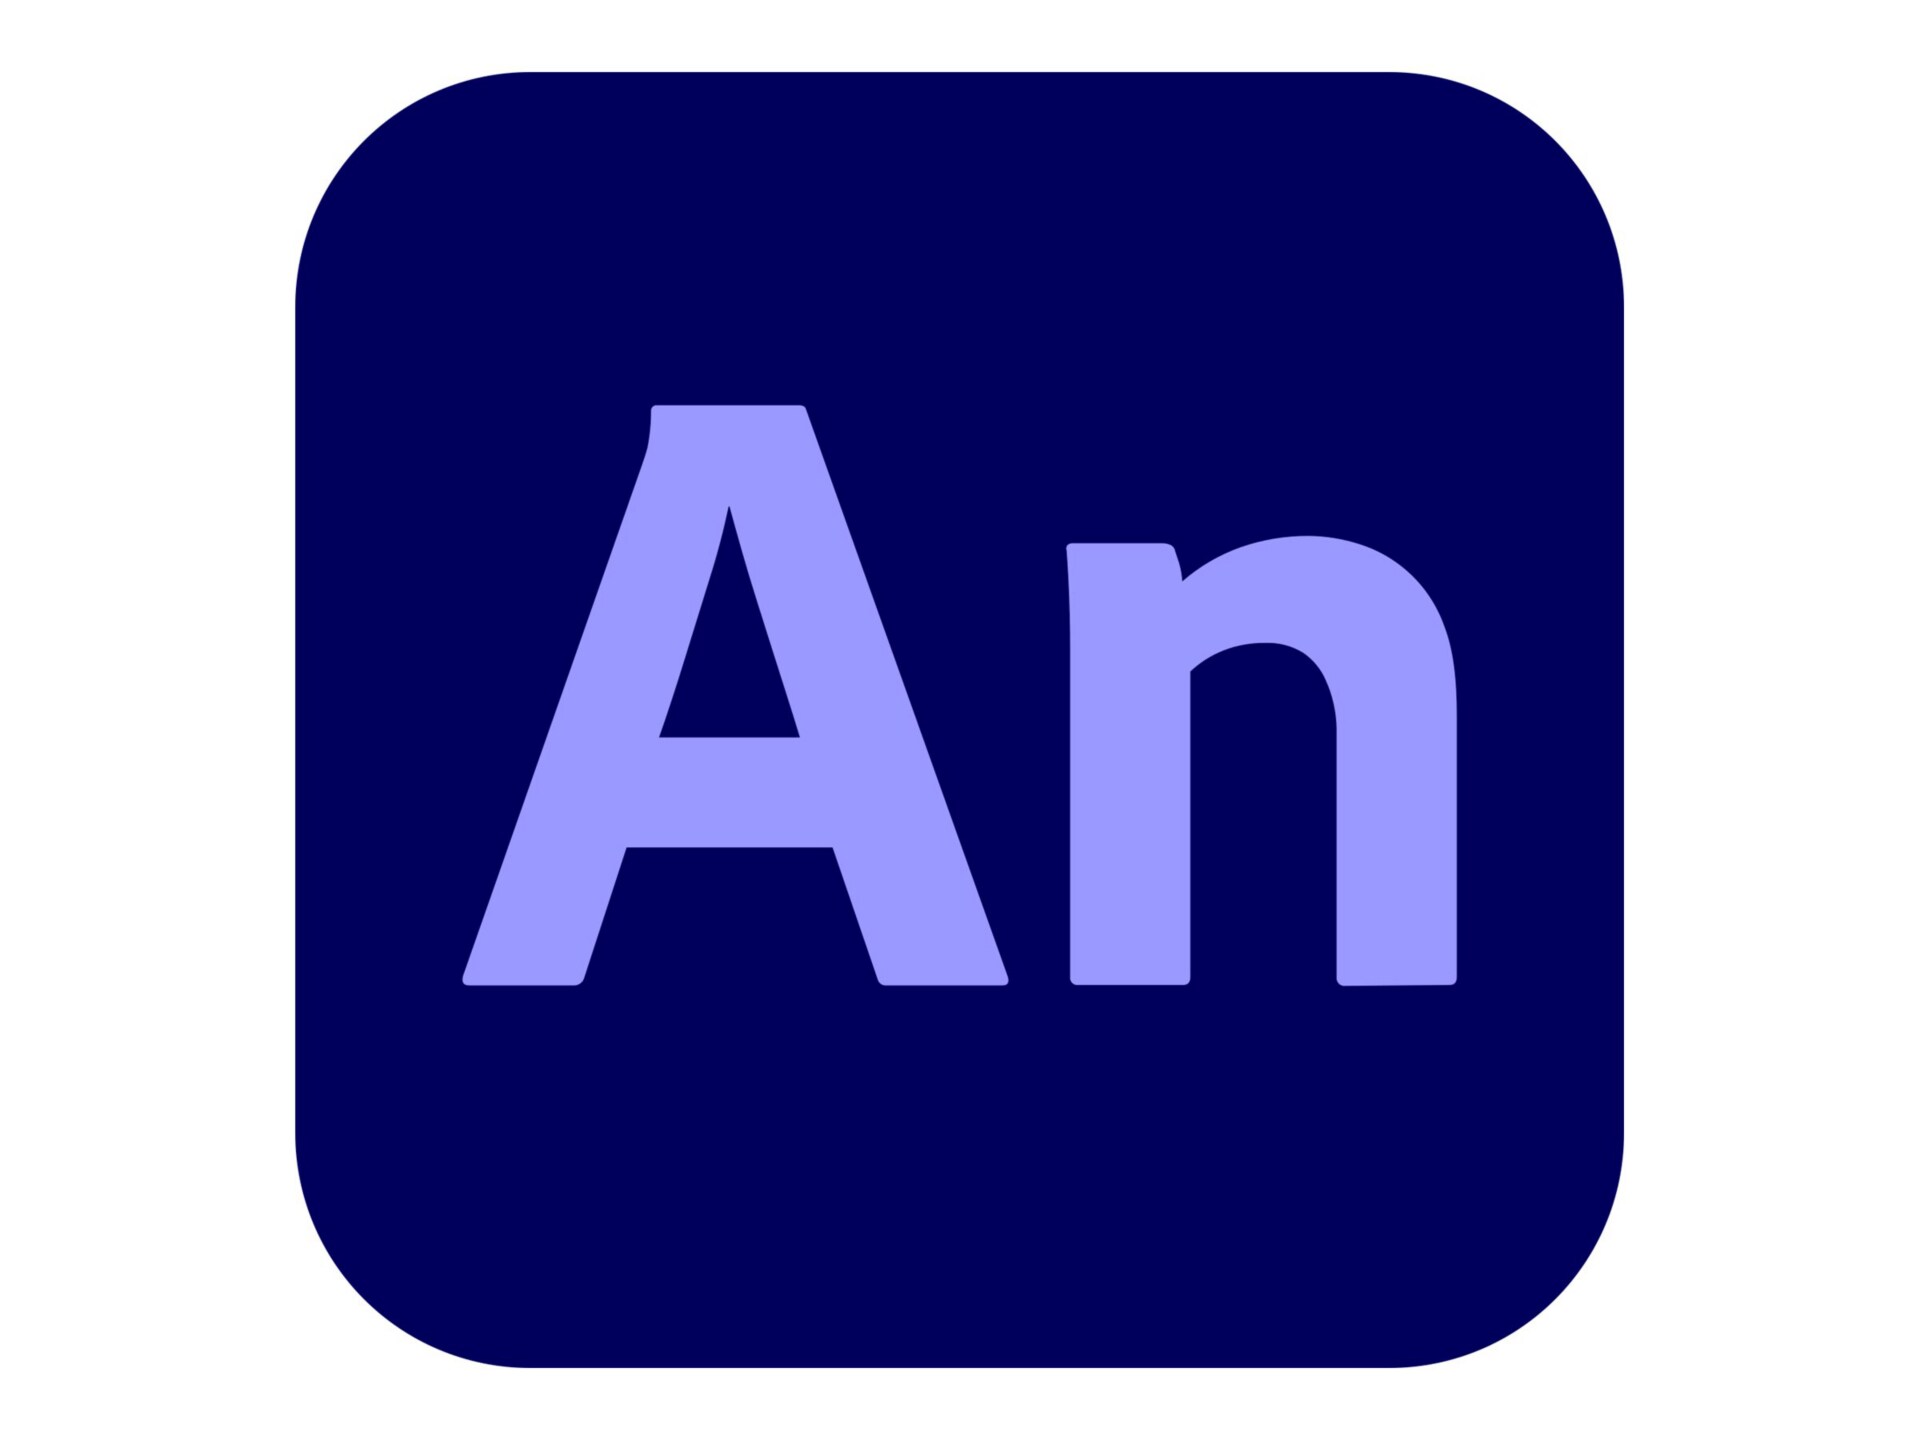 Adobe Animate CC for teams - Subscription New (6 months) - 1 named user